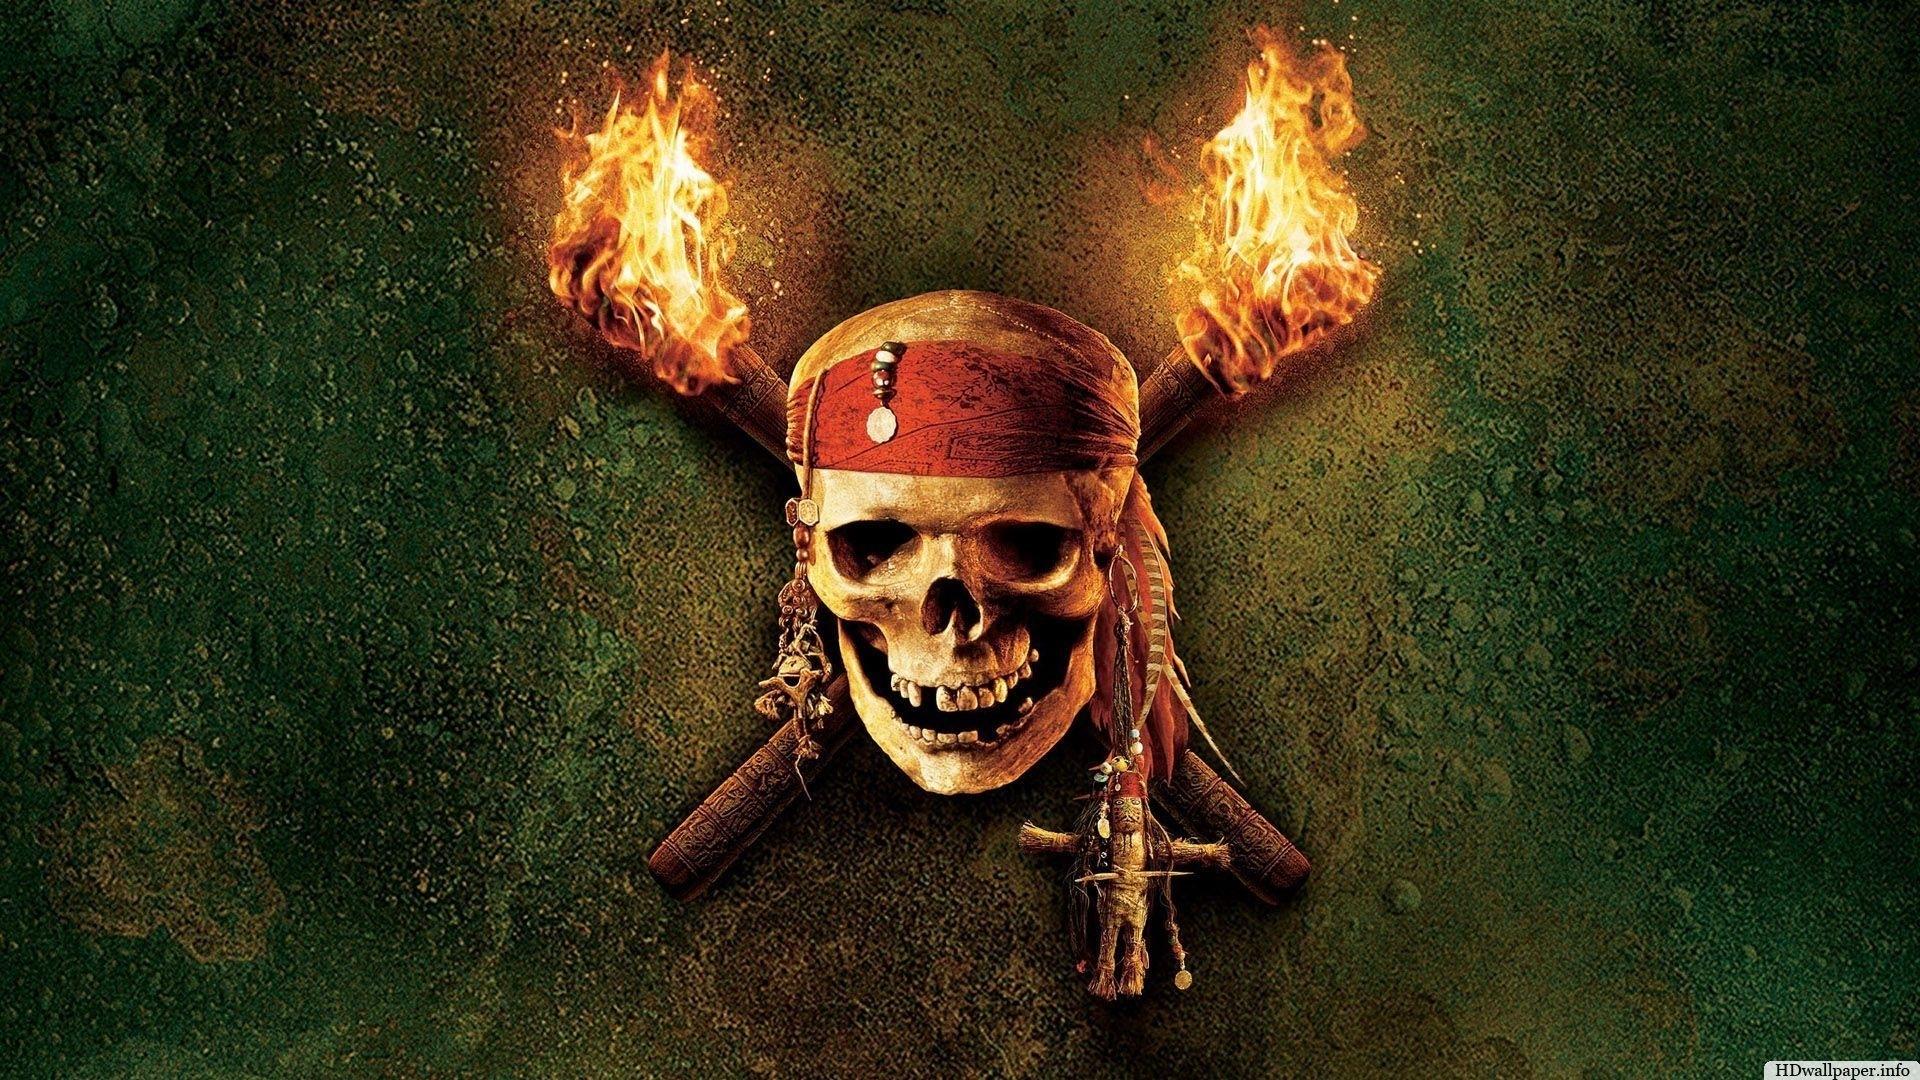 1920 x 1080 · jpeg - 10 Best Pirates Of Caribbean Wallpaper FULL HD 1080p For PC Background 2020